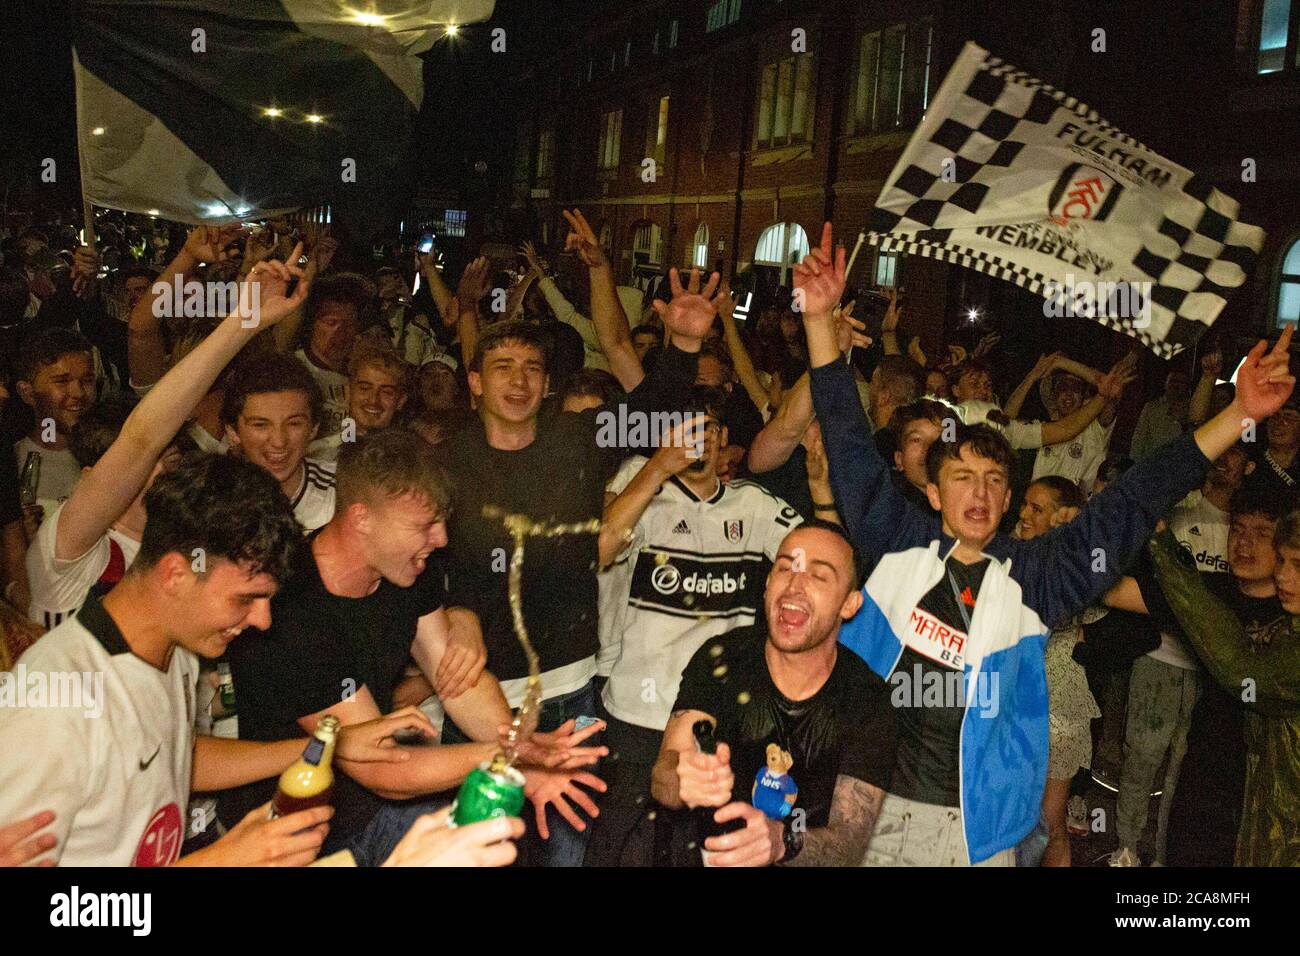 Fulham F.C. fans celebrate their team beating local rivals Brentford F.C.to secure promotion into the Premier League on the 4th of August 2020 Stock Photo